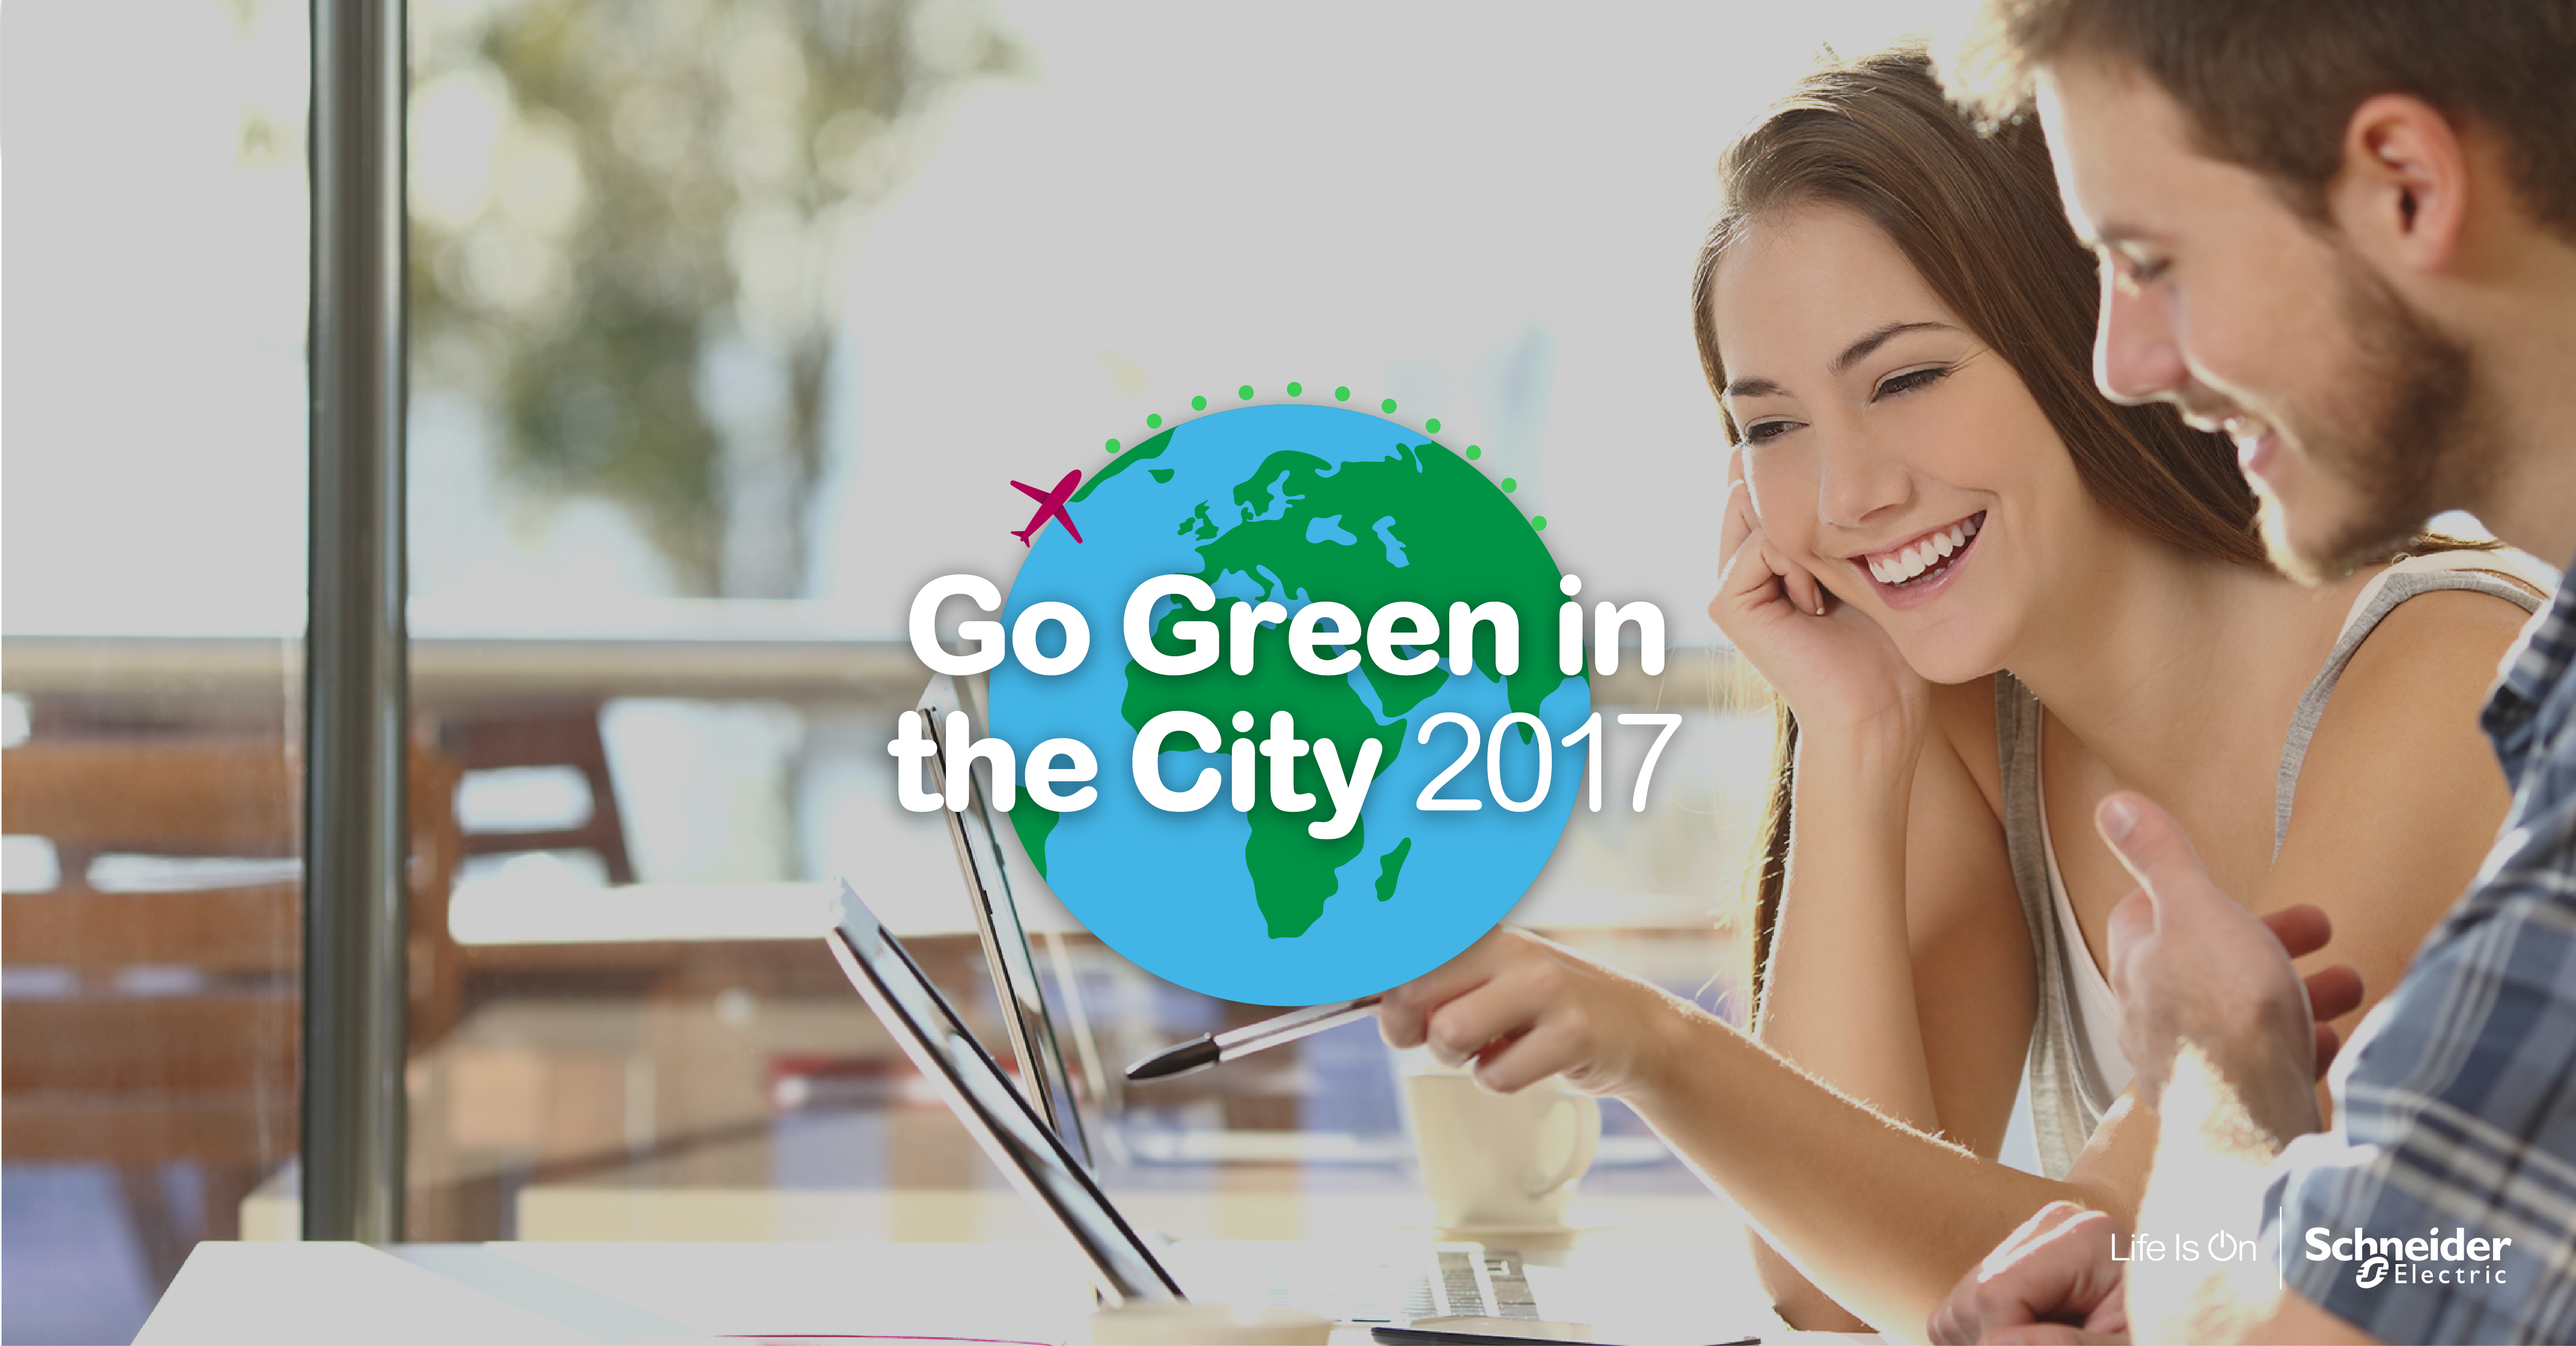 Go Green in the City 2017 – Win a trip around the world and a job at Schneider Electric!